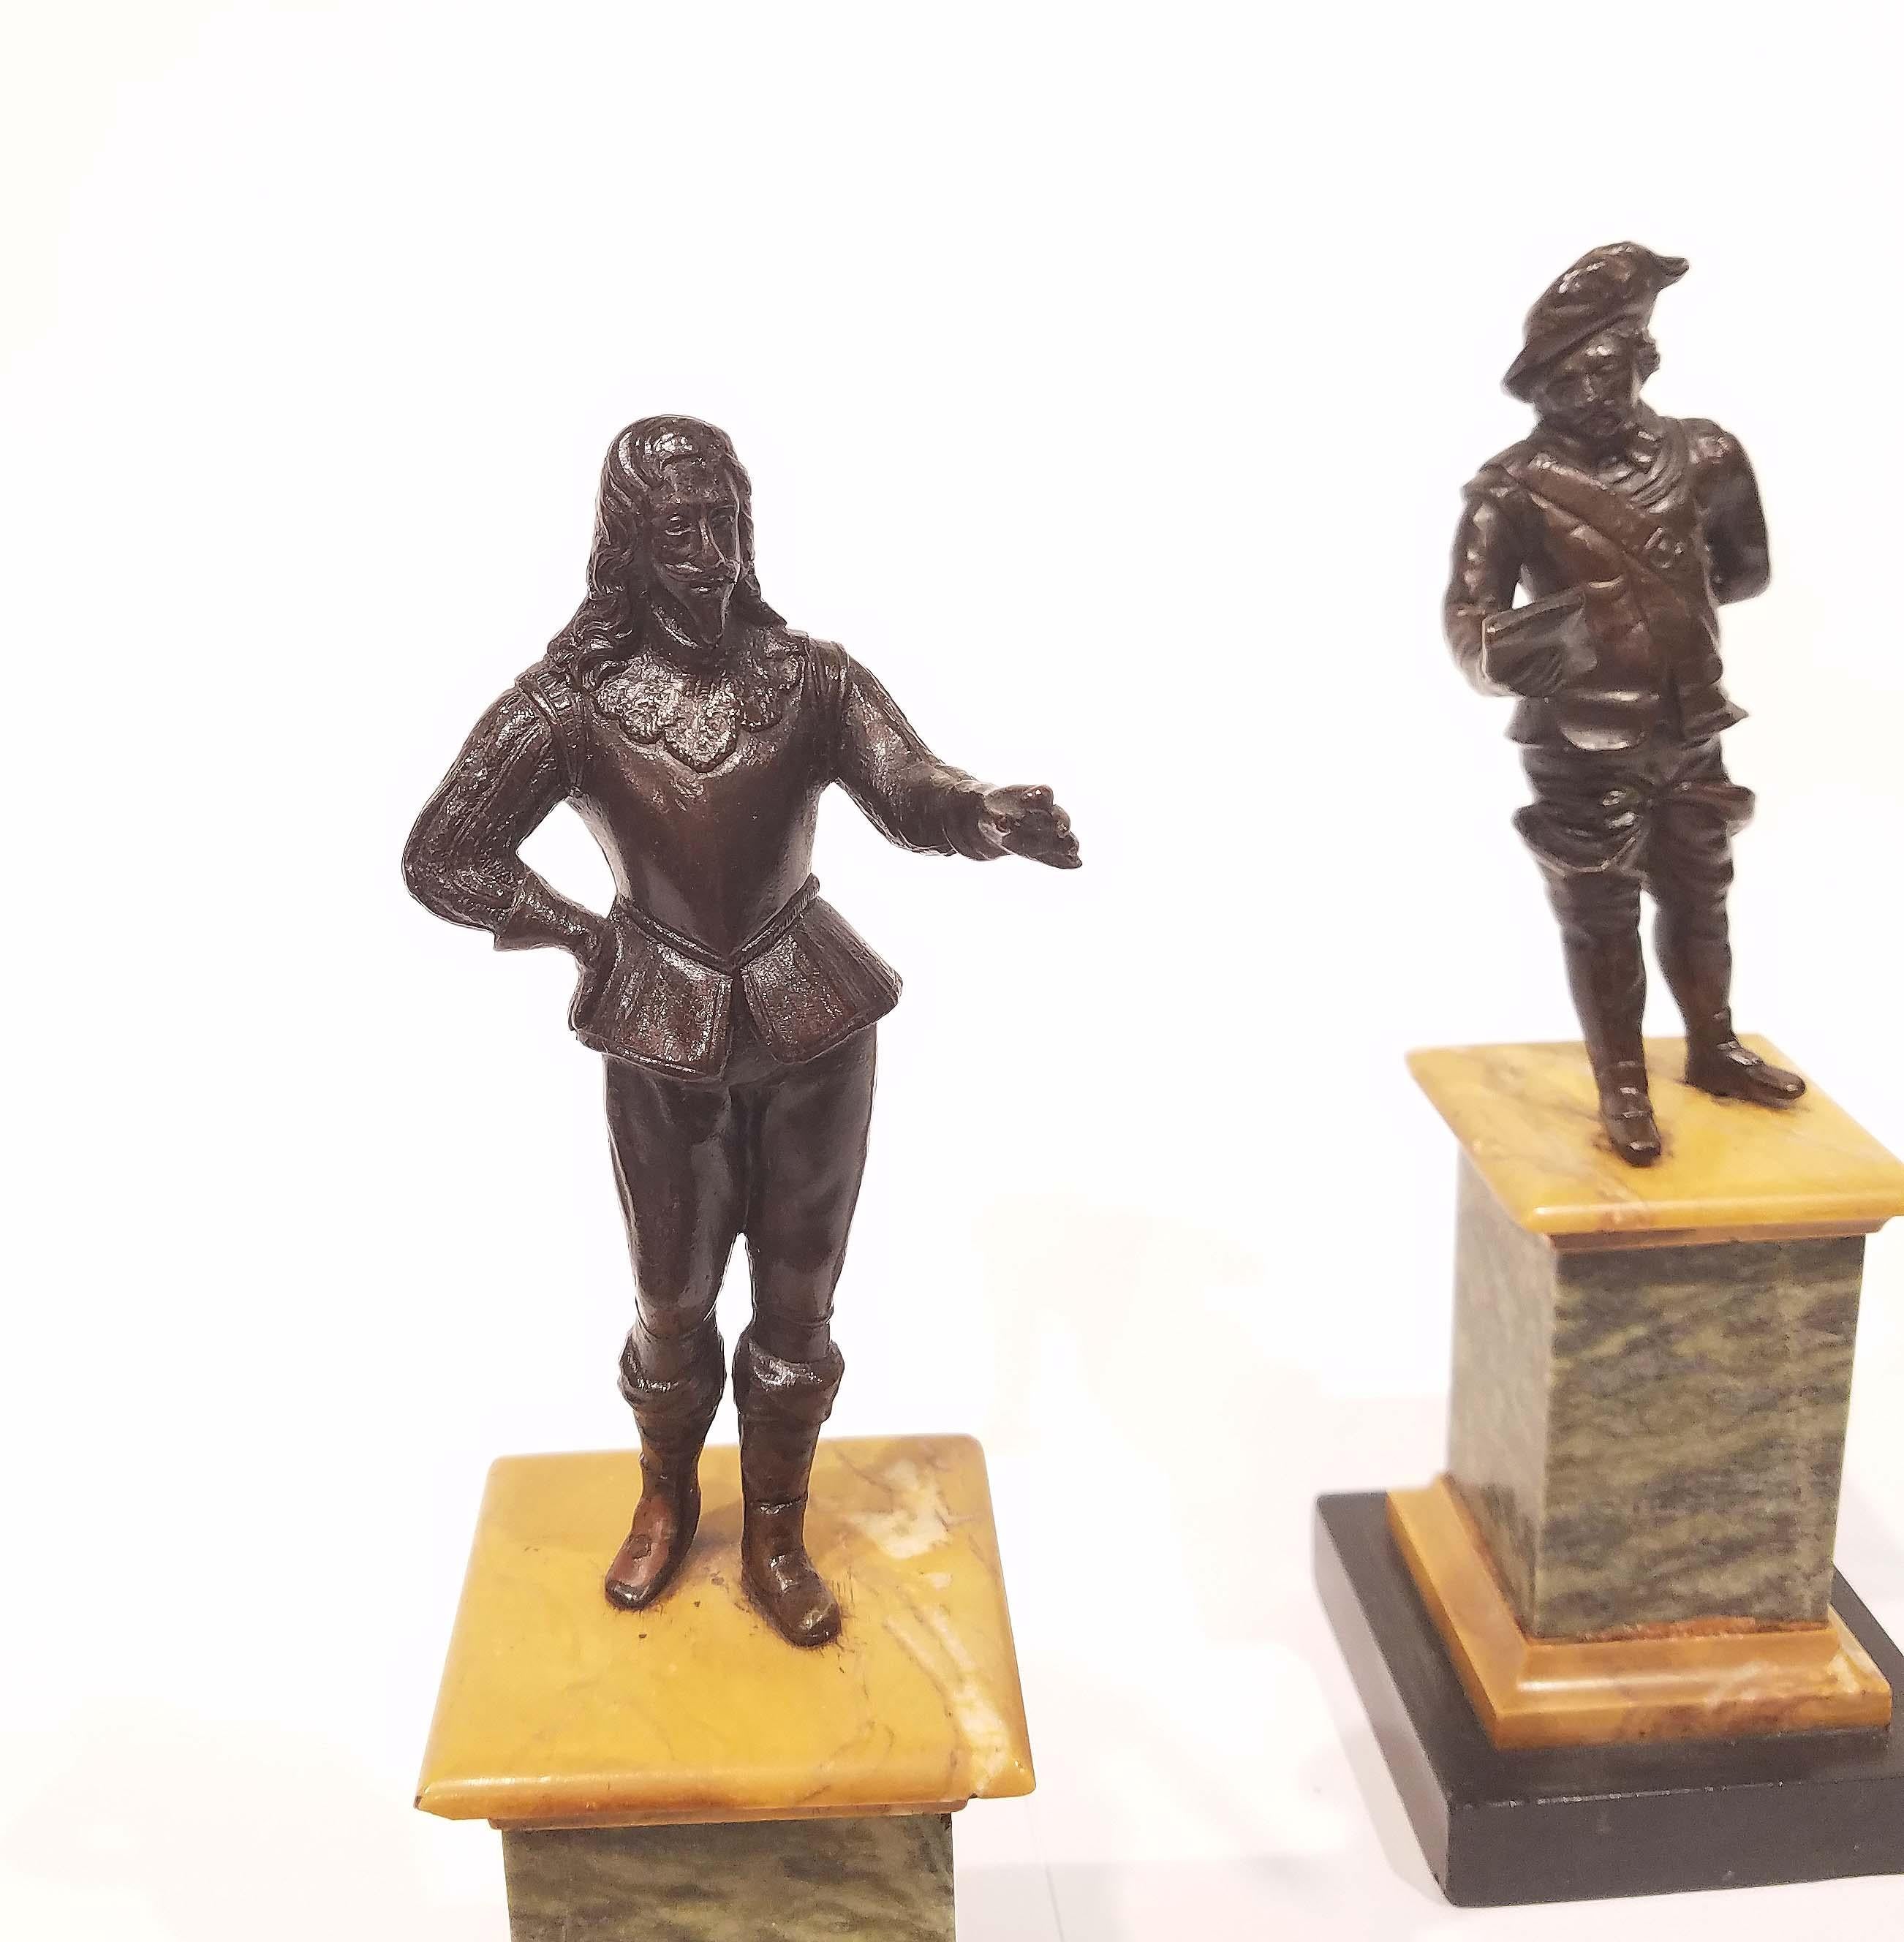 Solid cast bronze with rich black, brown patina mounted on marble bases, circa mid-19th century. Measures about 10